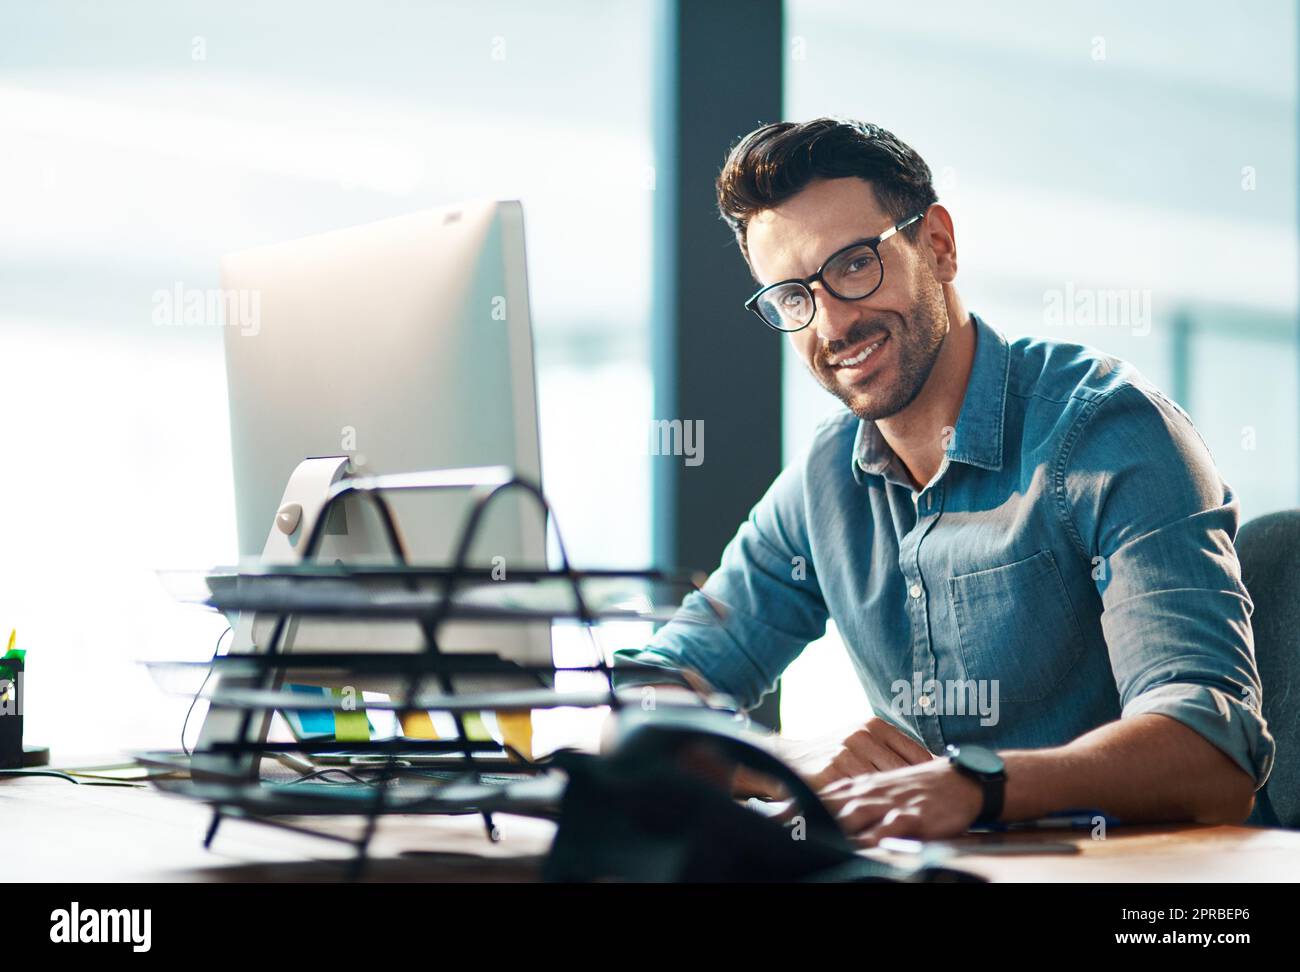 Confident, relaxed and happy professional manager or HR assistant working on a computer in a modern office. Smiling, proud male typing and responding to emails, booking and managing appointments Stock Photo